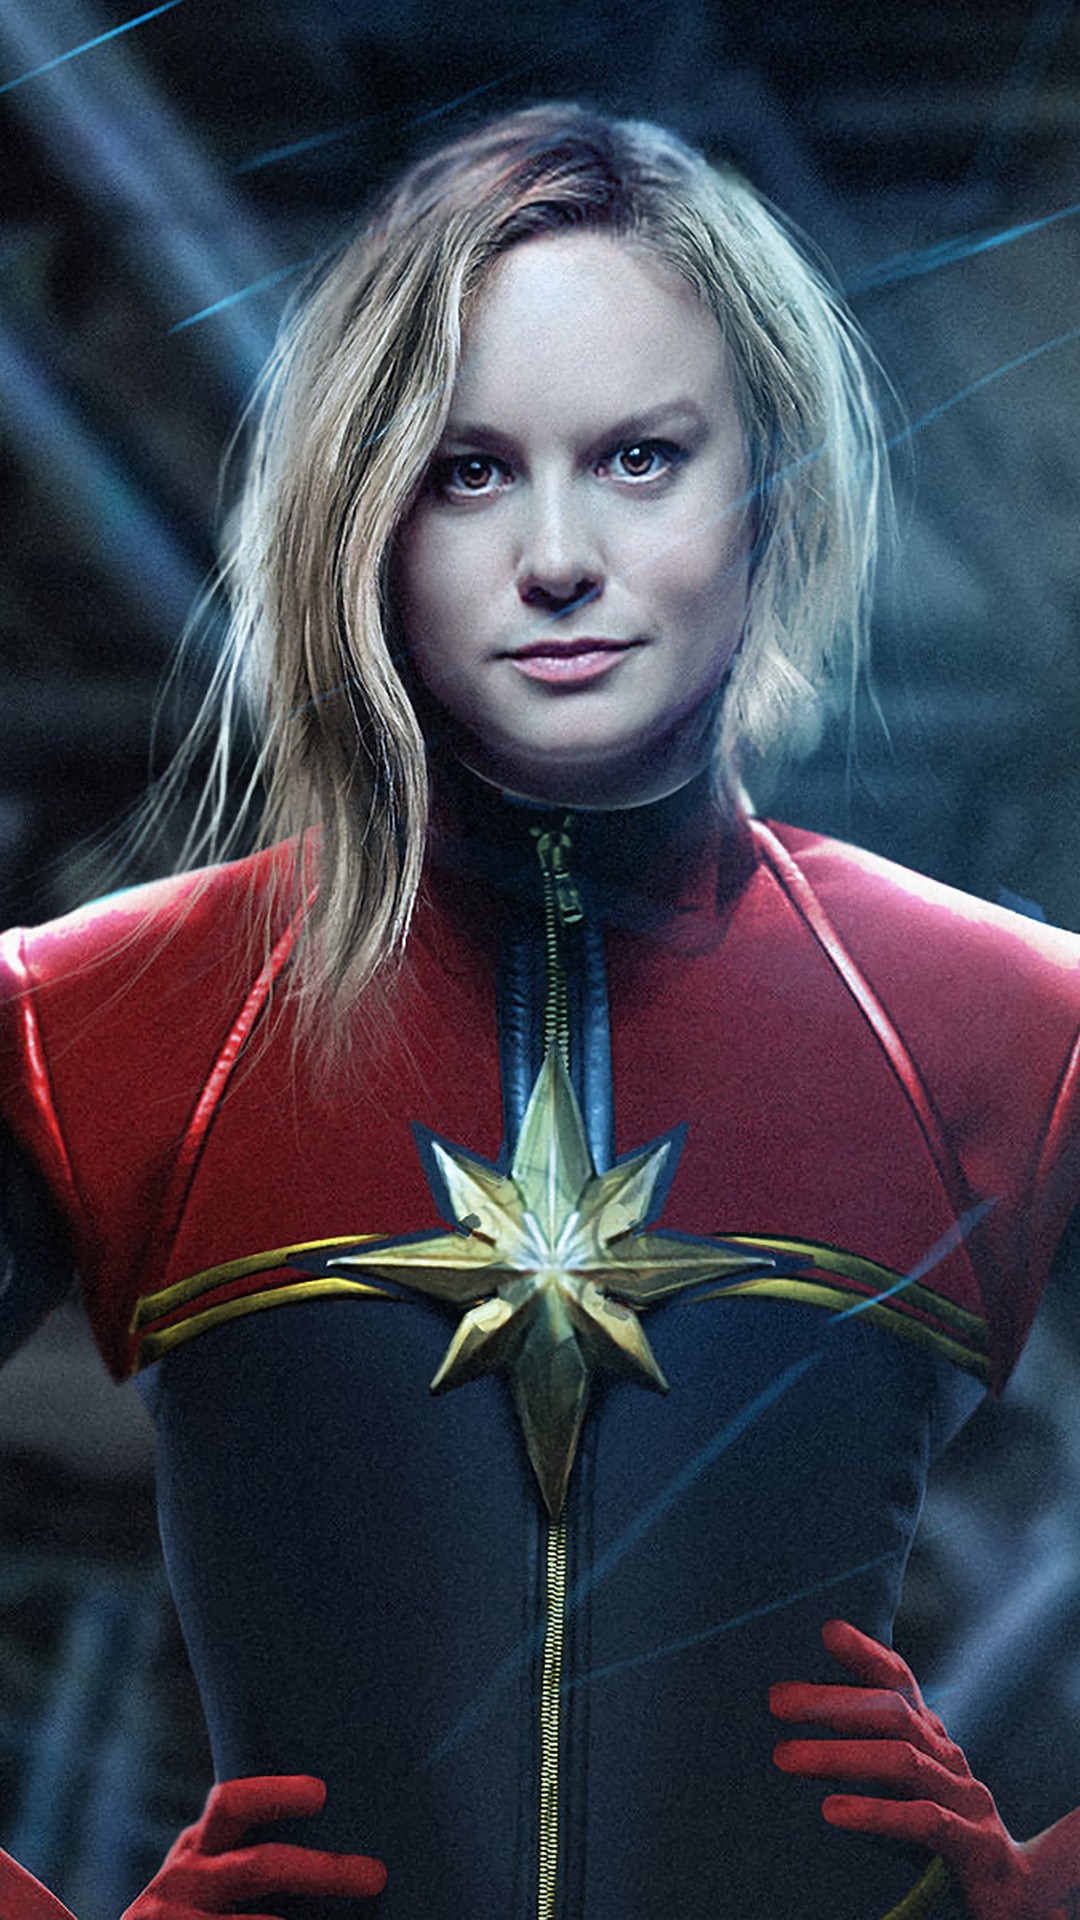 iPhone Wallpaper Captain Marvel With high-resolution 1080X1920 pixel. You can use this wallpaper for your iPhone 5, 6, 7, 8, X backgrounds, Mobile Screensaver, or iPad Lock Screen